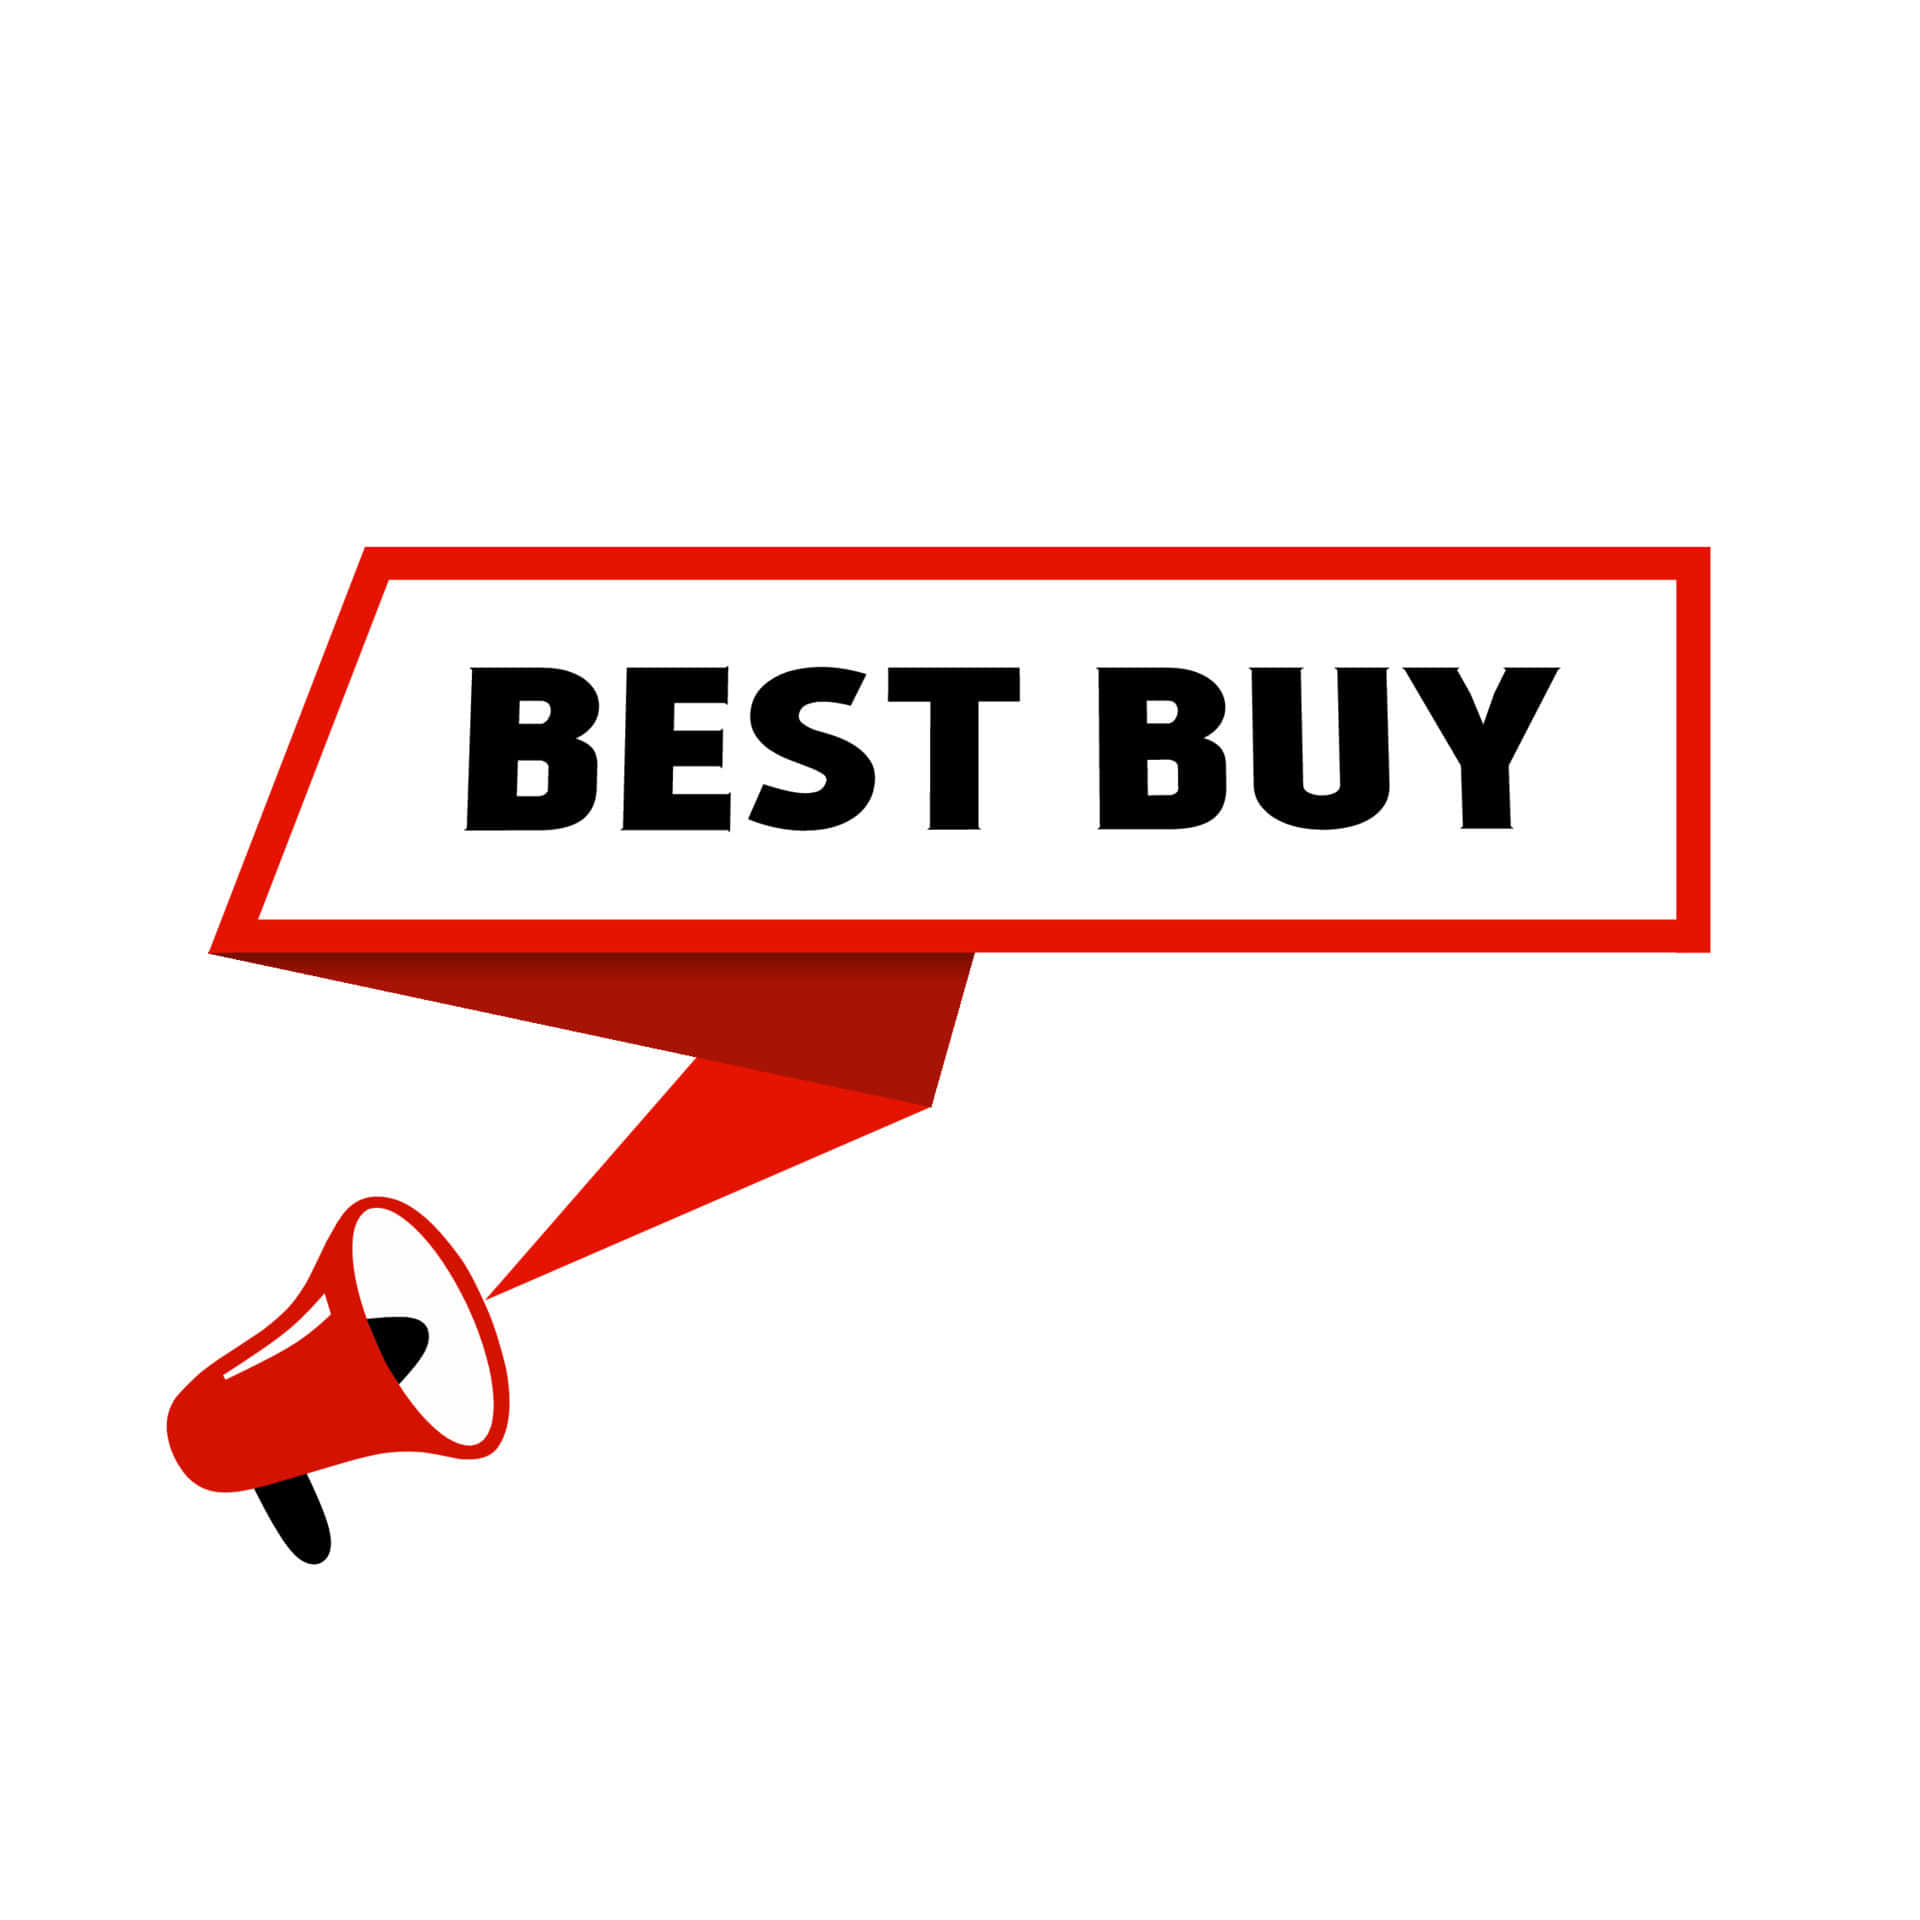 Get Your Electronic Gadgets from Best Buy